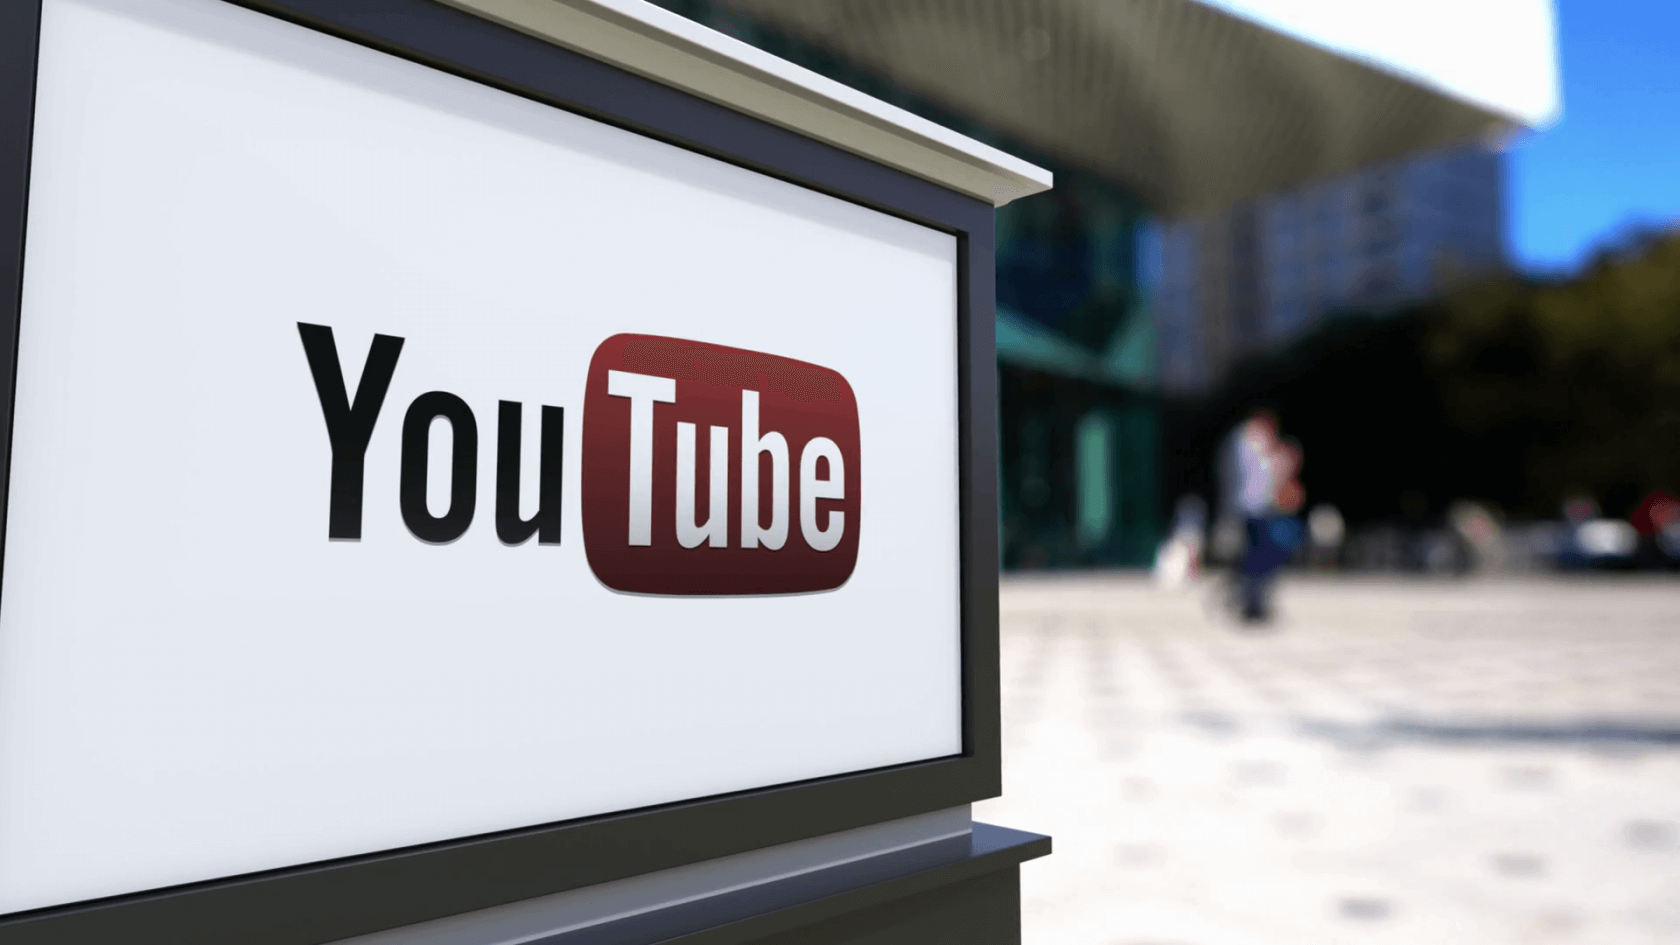 YouTube terminates over 400 channels in response to suspected child exploitation